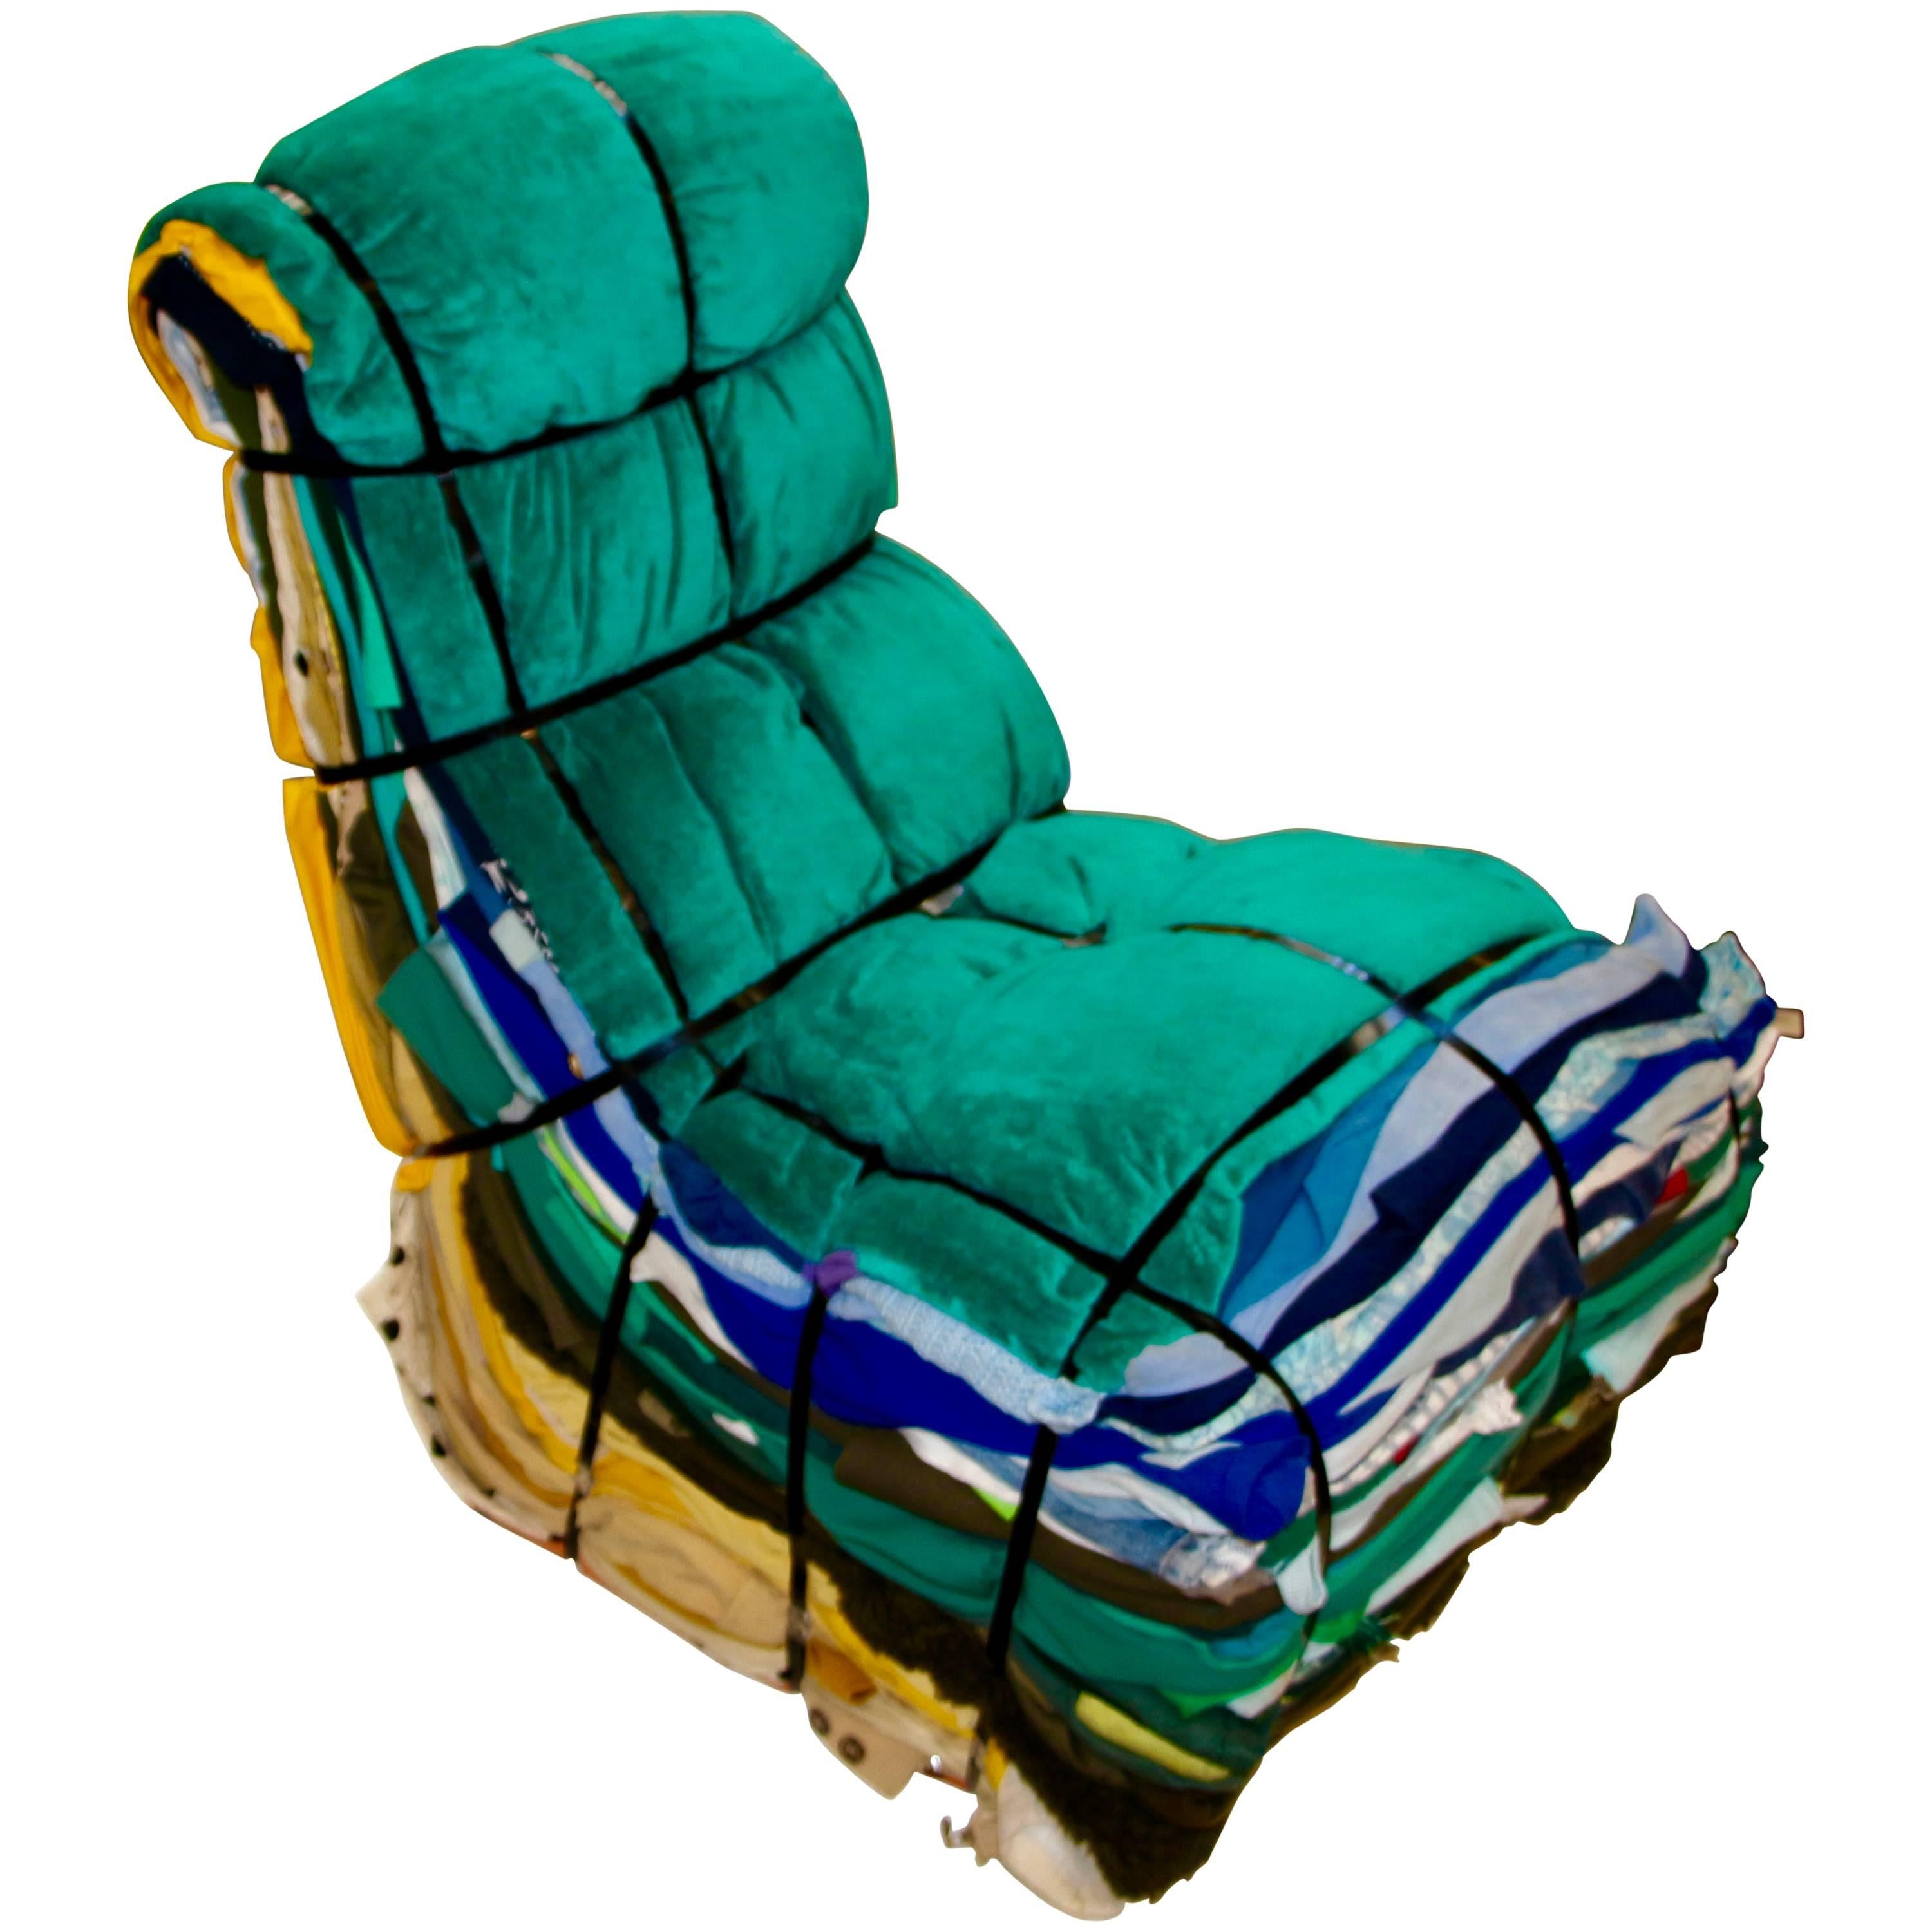 Tejo Remy Rag Chair by Droog from 1991